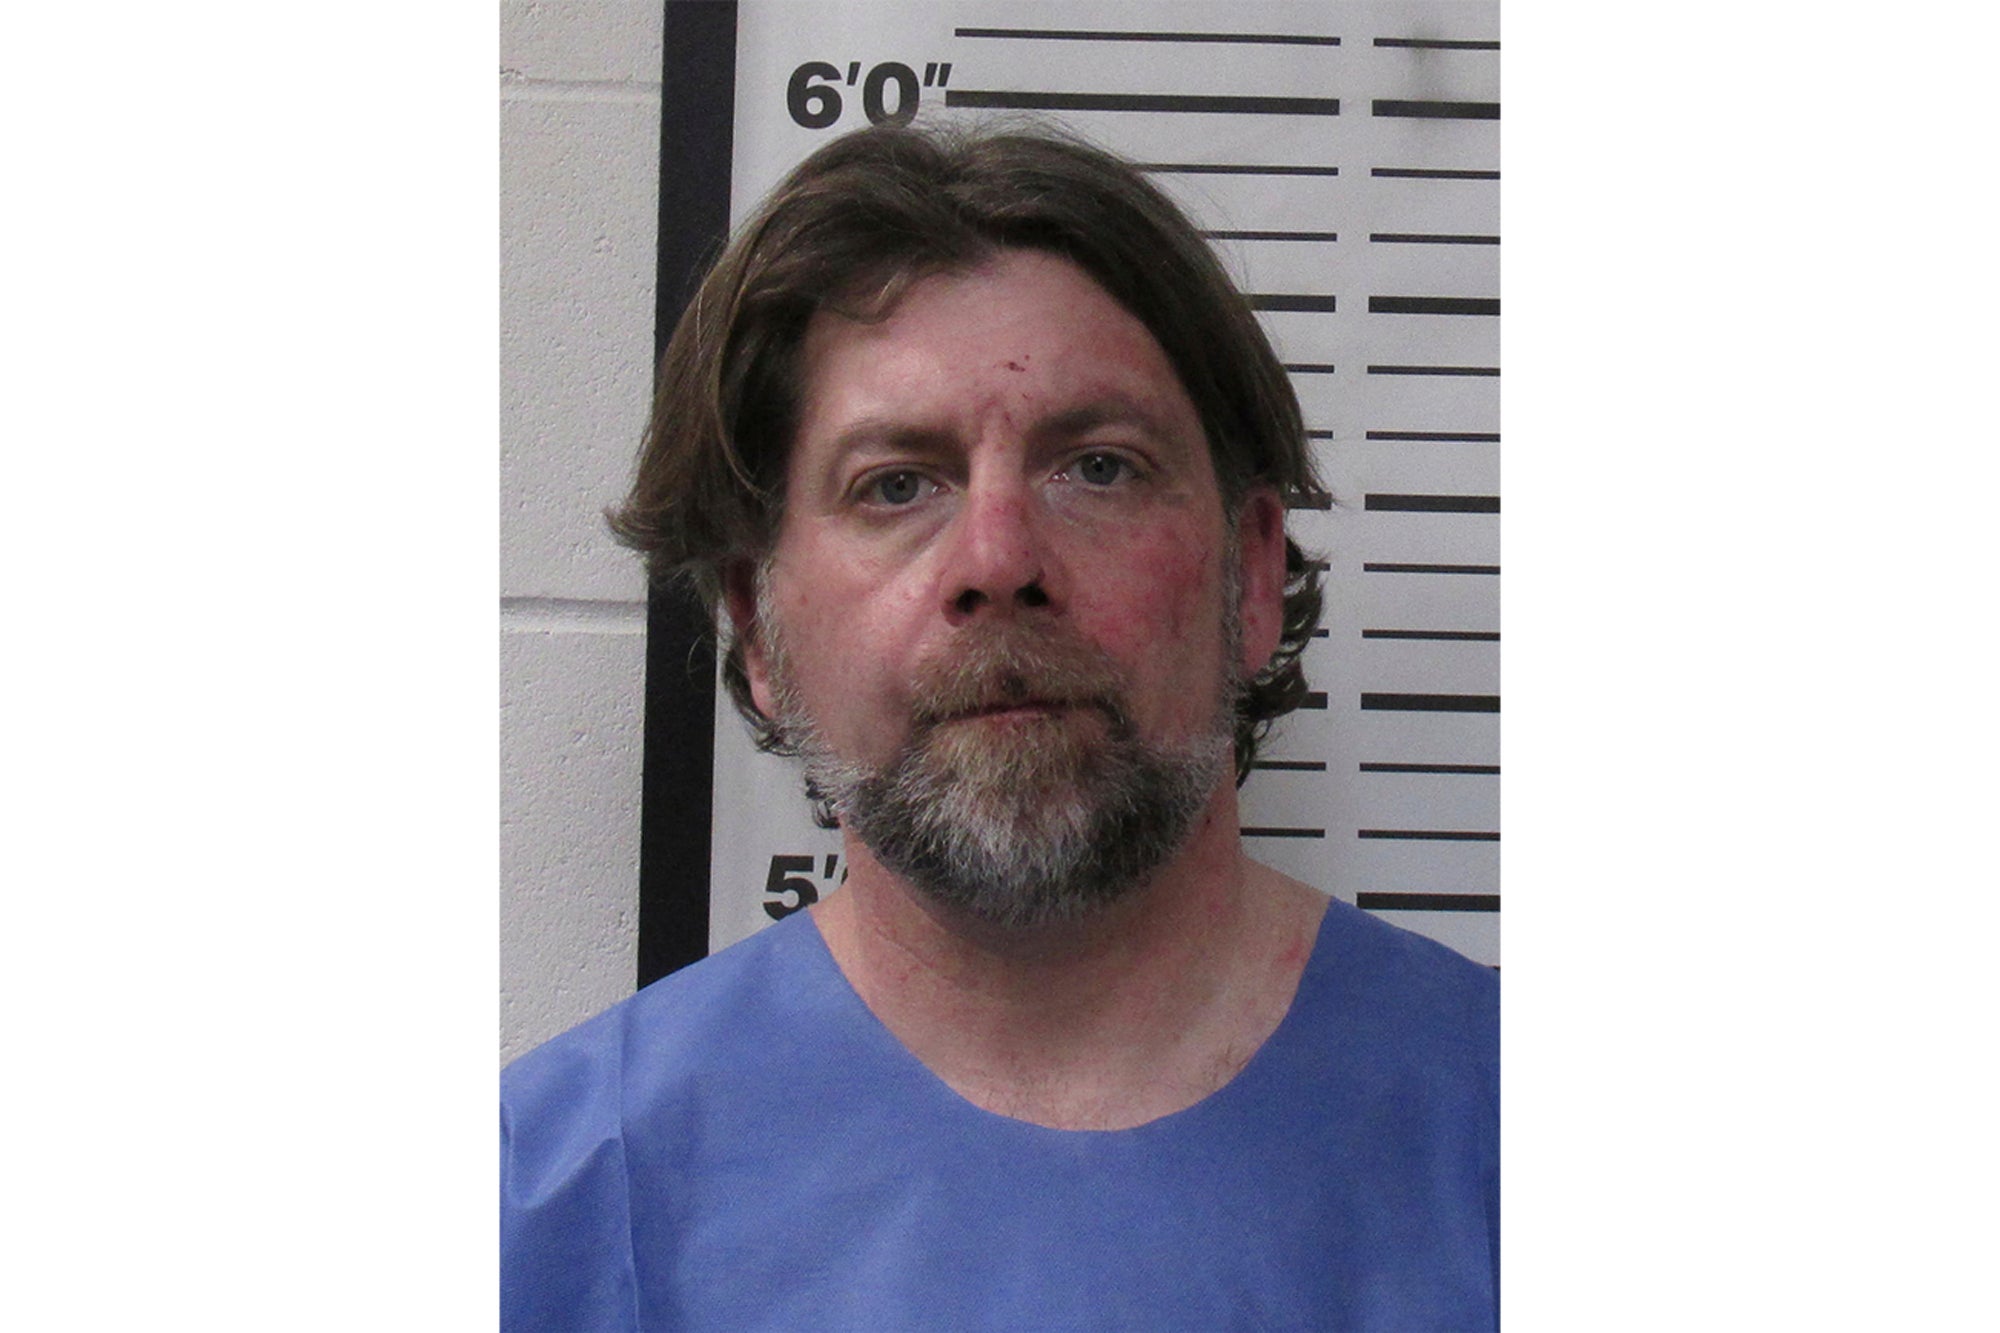 Booking photo of Ian Cramer, who pleaded not guilty on 17 April to a homicide charge related to a crash that killed a North Dakota sheriff’s deputy